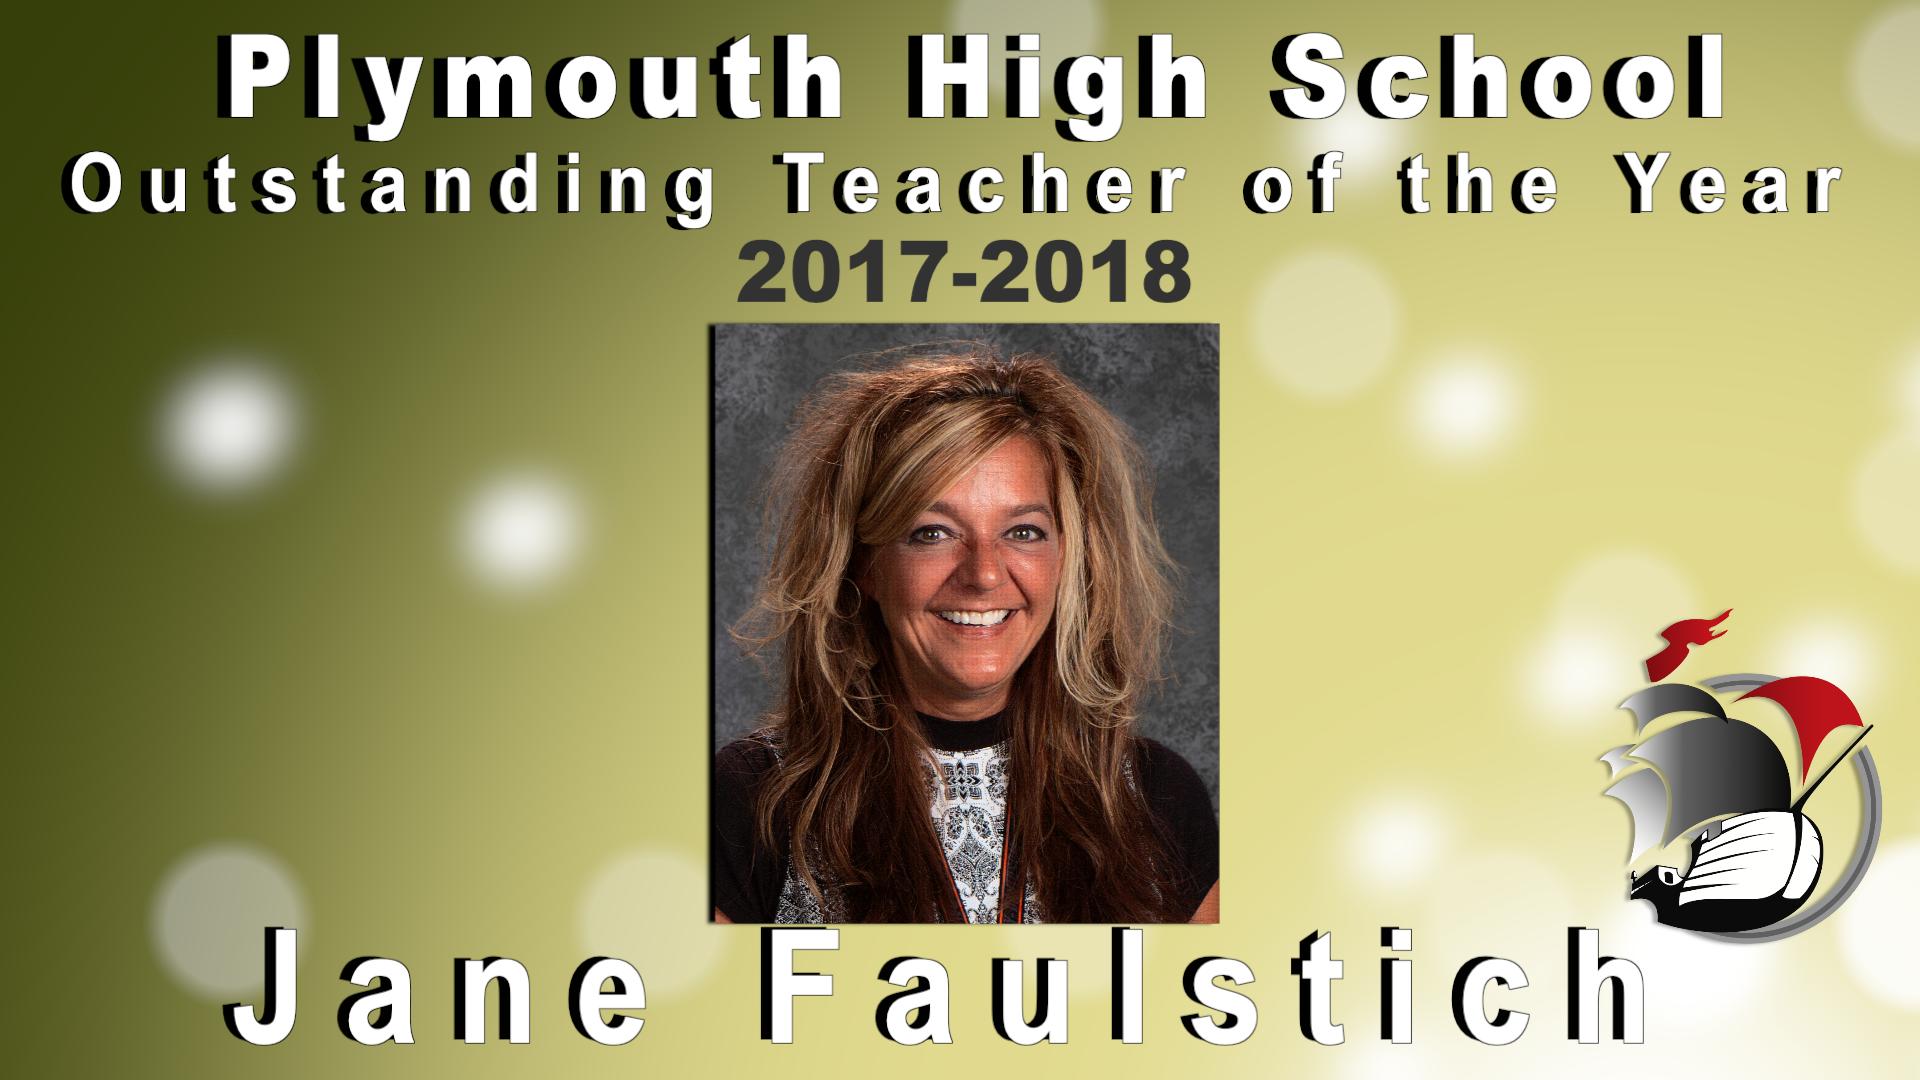 Plymouth High School Outstanding Teacher of the Year 2017-2018 Jane Faulstich